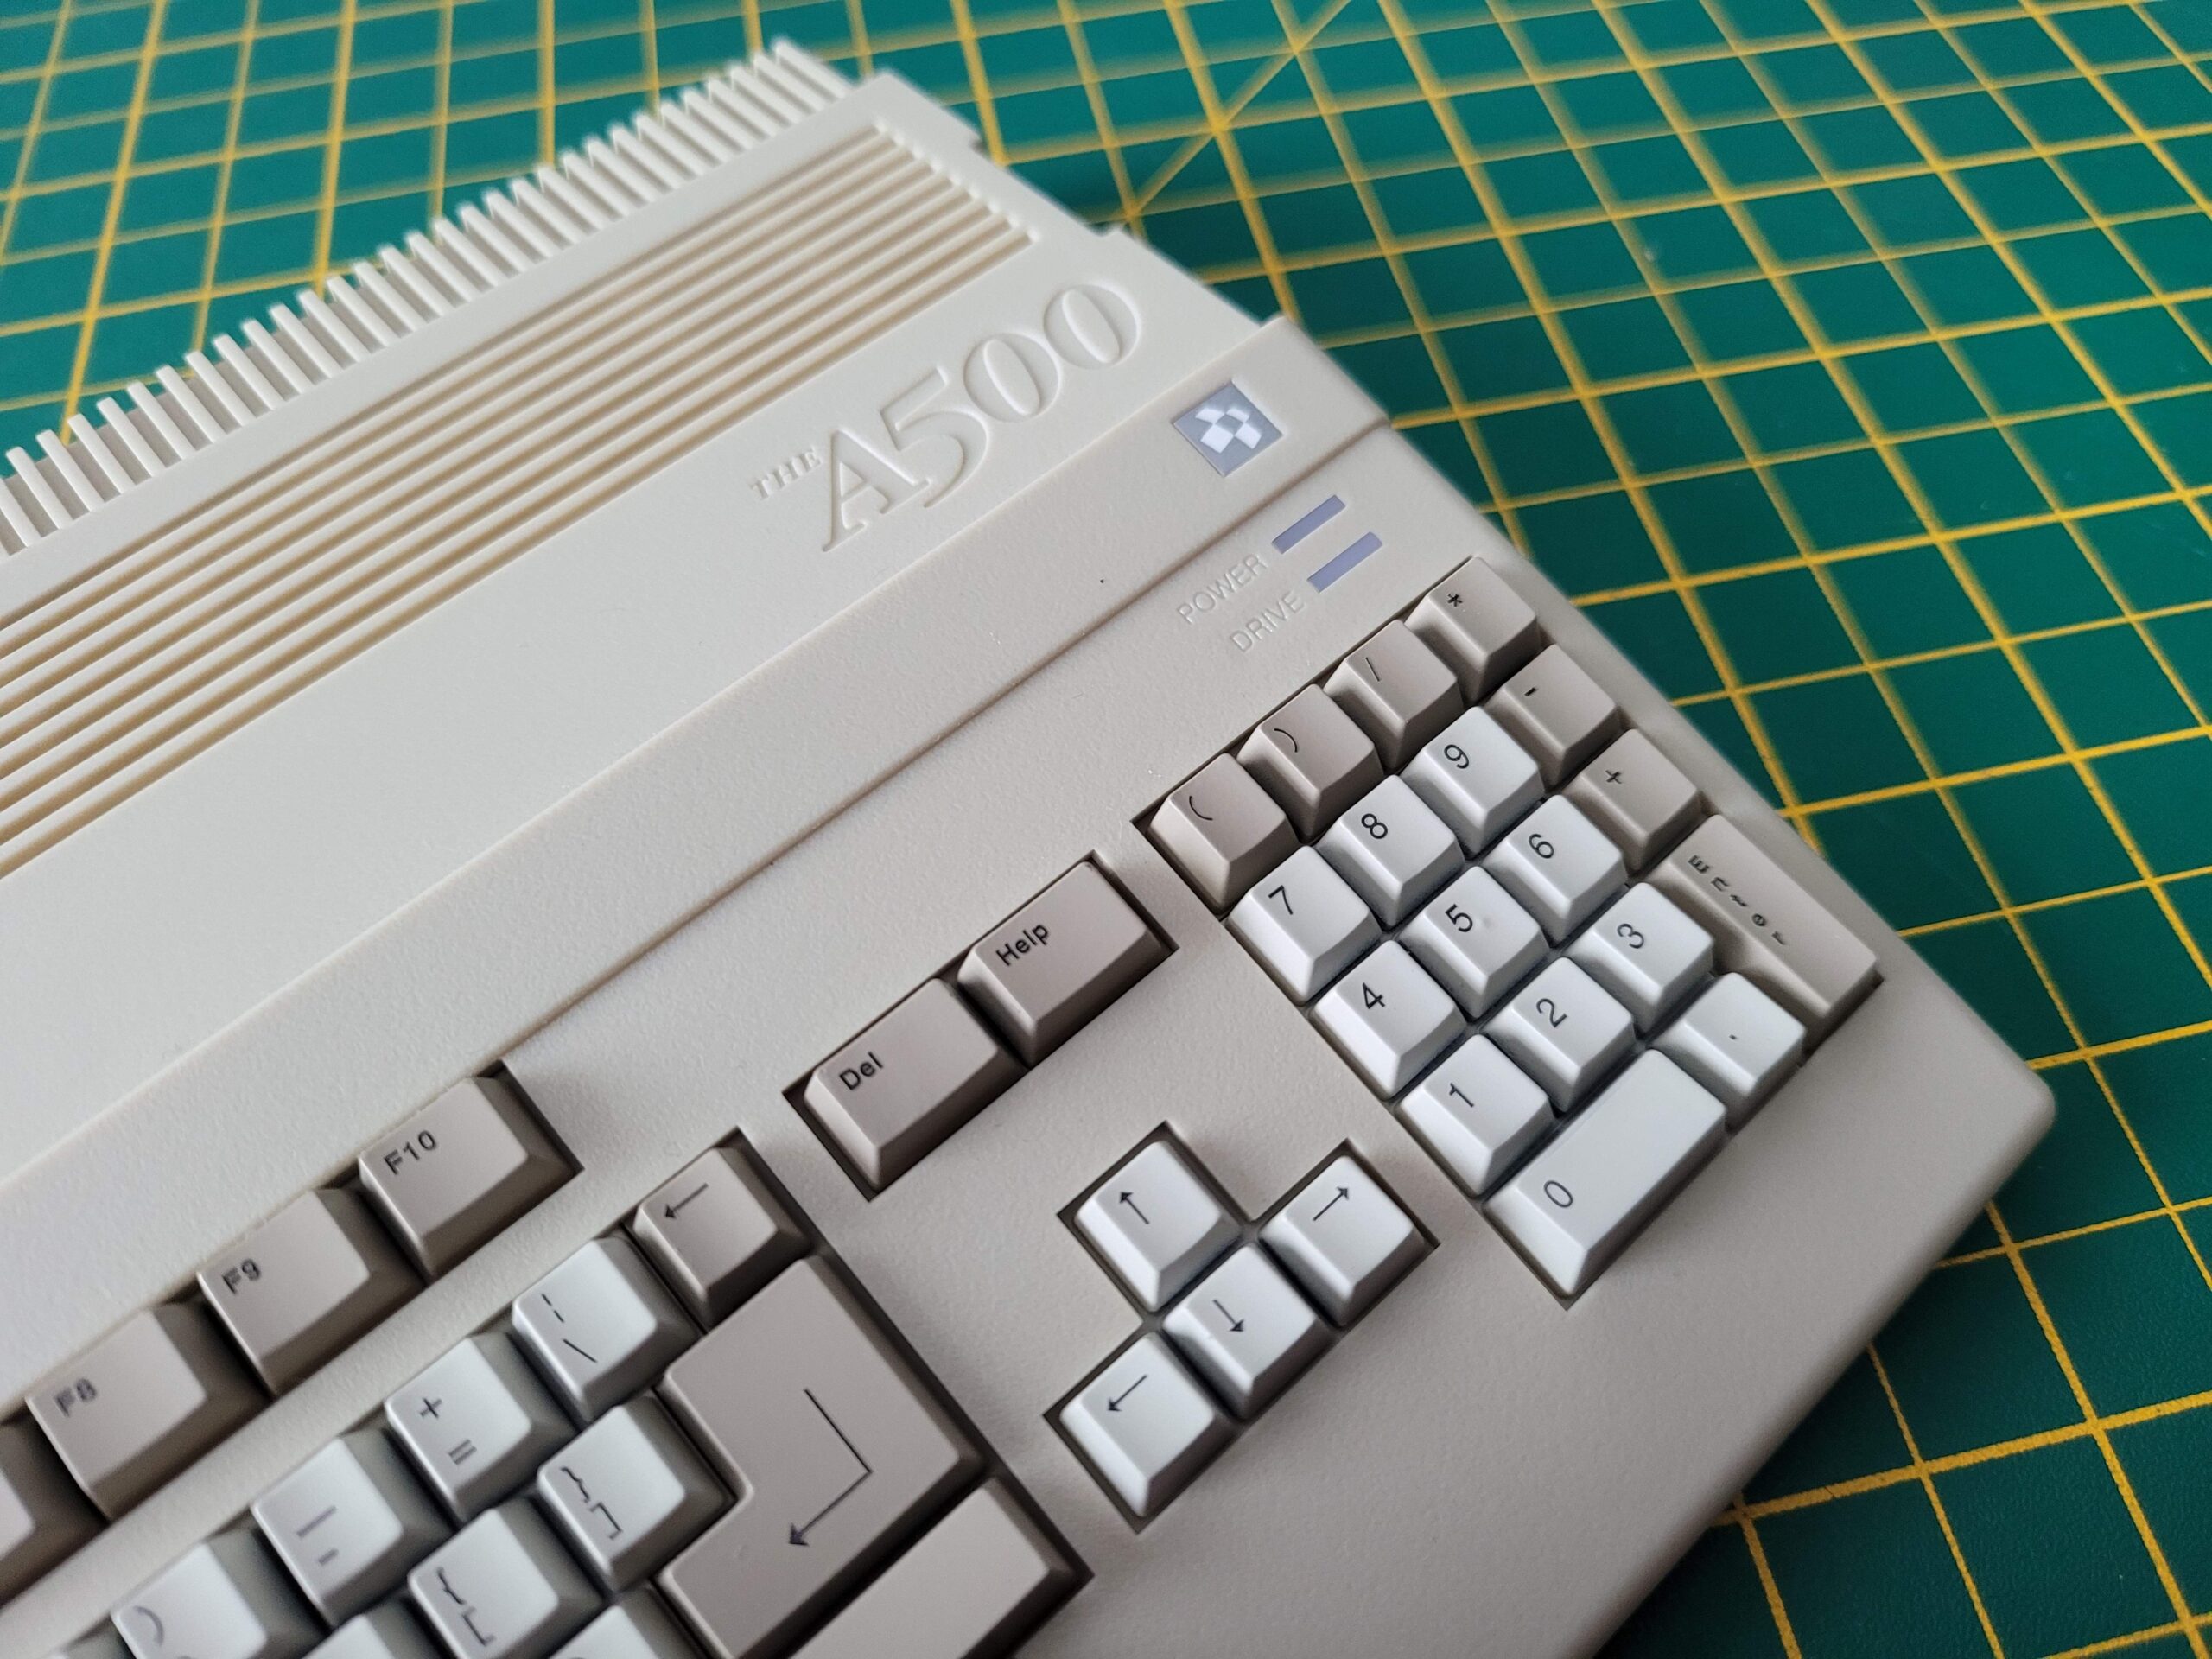 THEA500 Mini REVIEW & How To! Is the NEW AMIGA amazing?